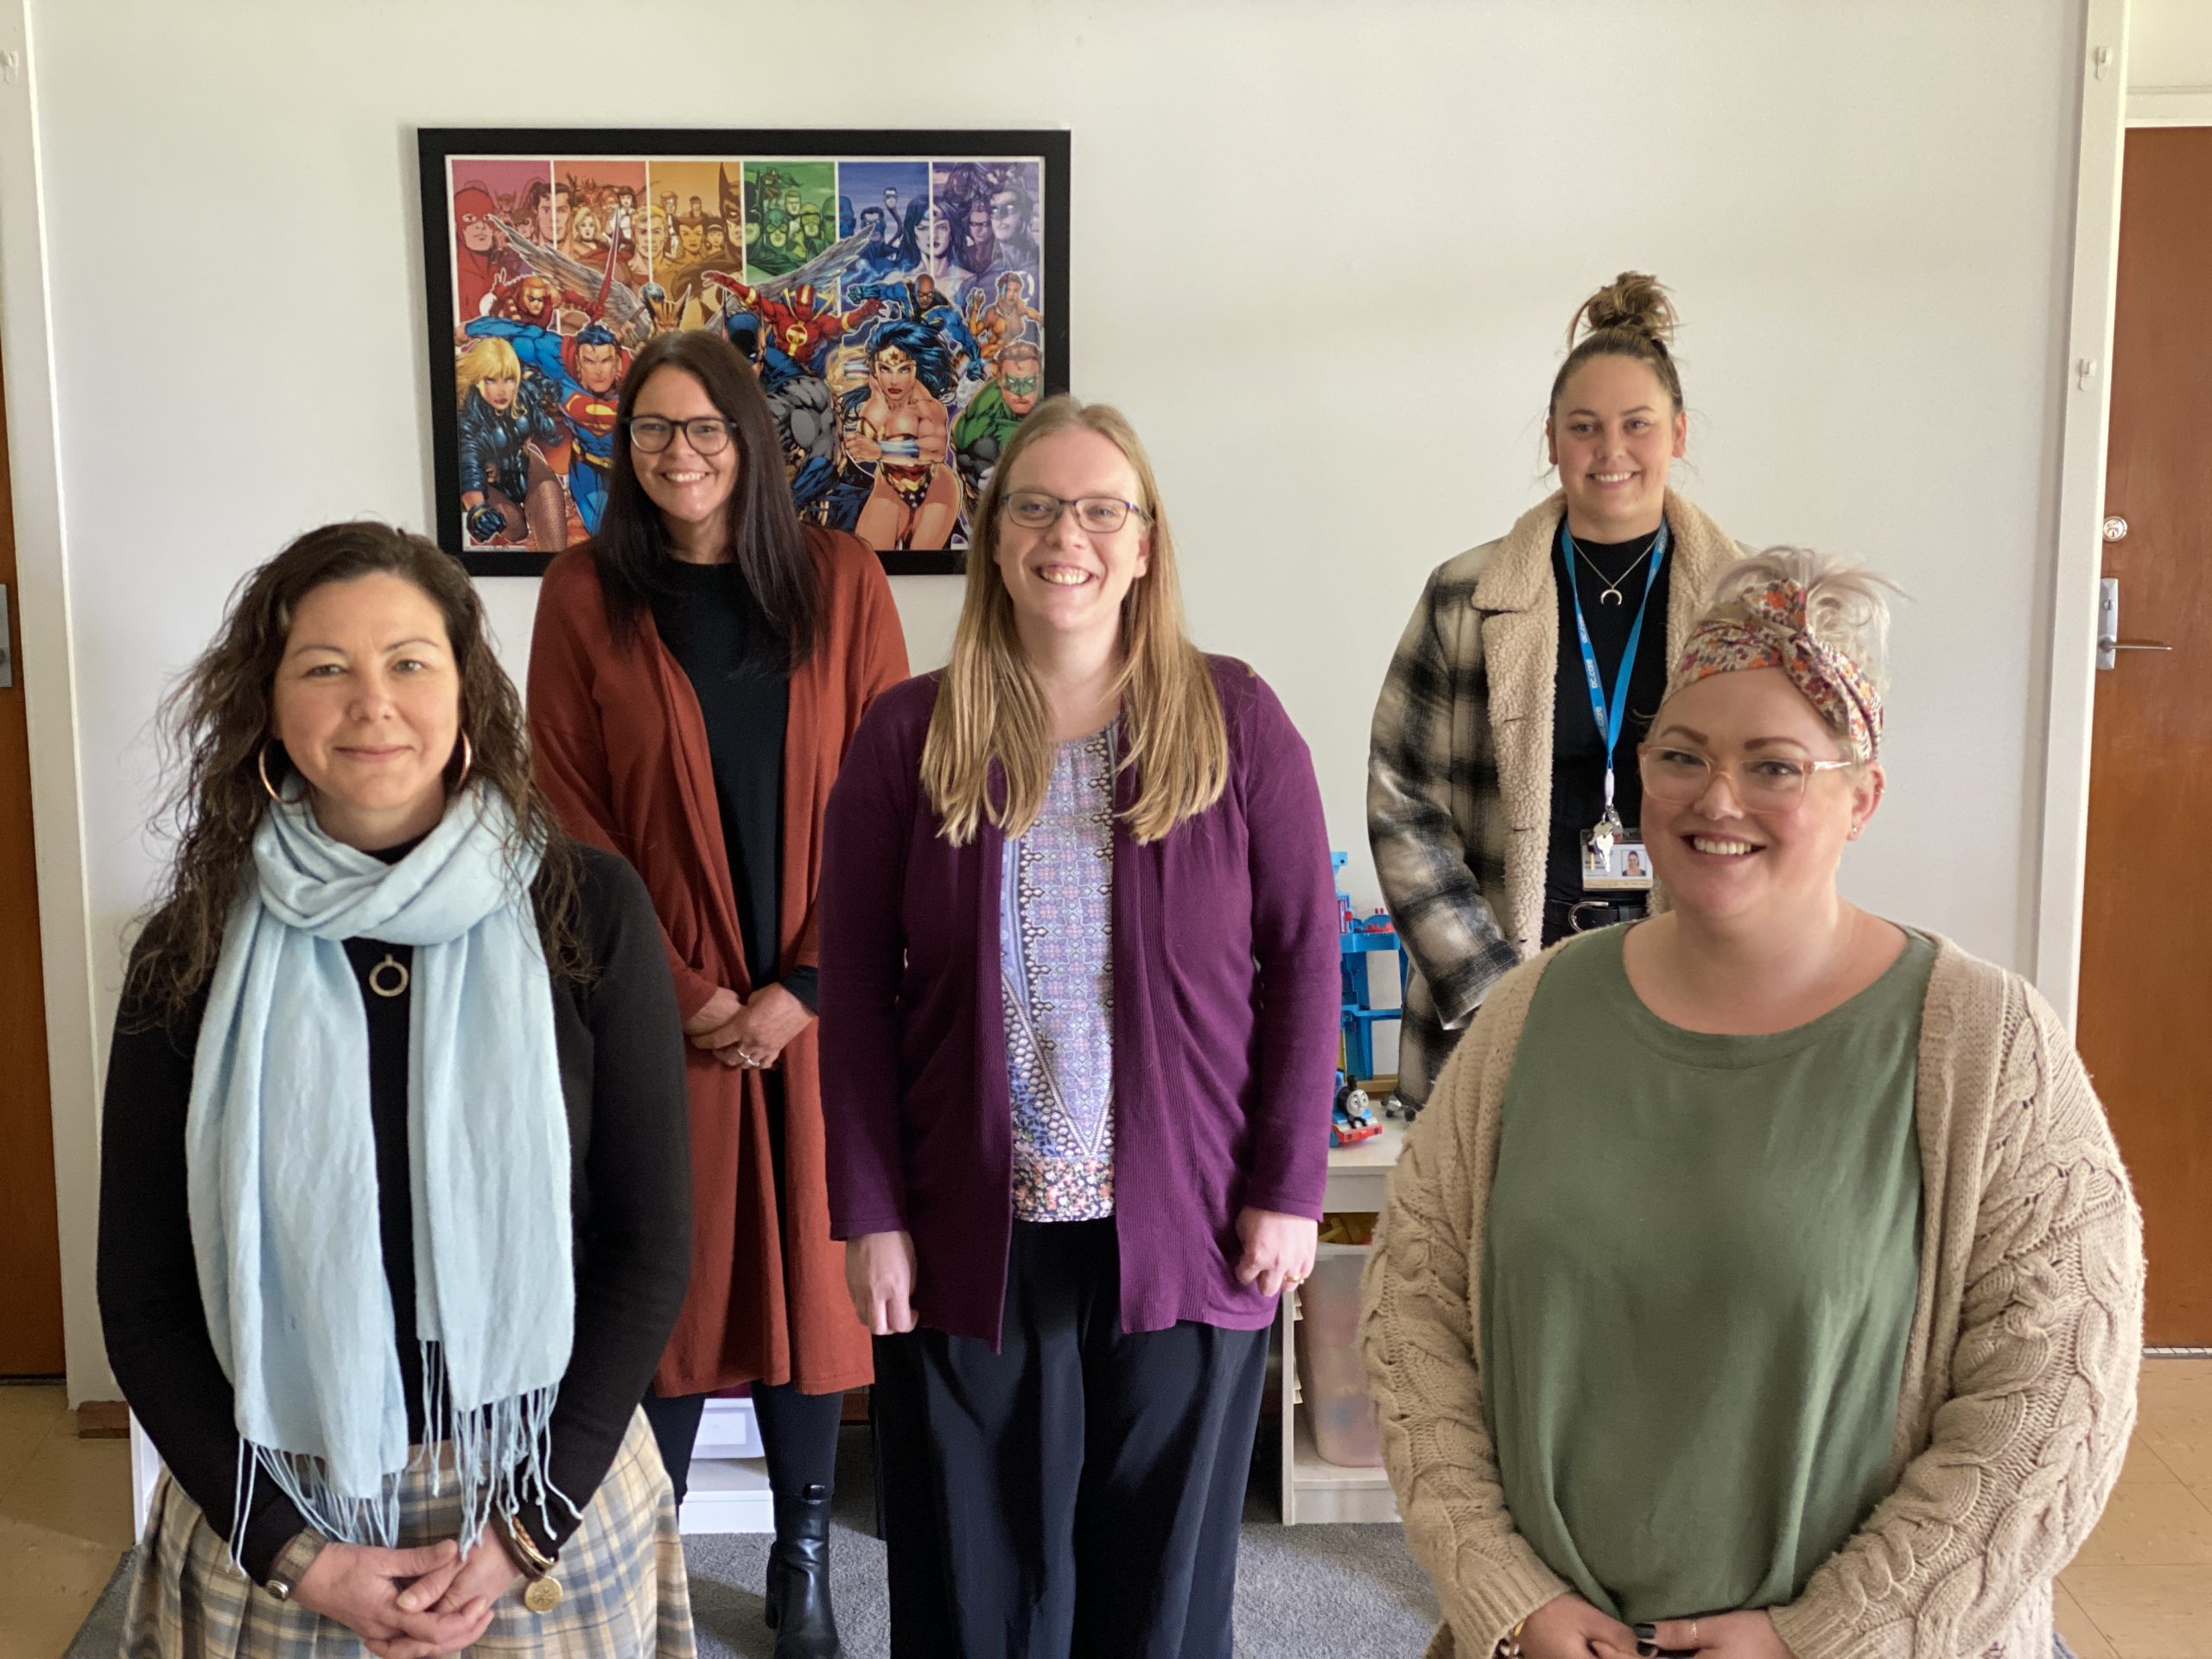 CARING FOR CHILDREN: Mount Gambier ac.care child and youth residential care house supervisors Natalie, Lynne, Caroll, Brooke and Jaana look forward to welcoming new staff recruits and continuing to support vulnerable young people as the service expands.